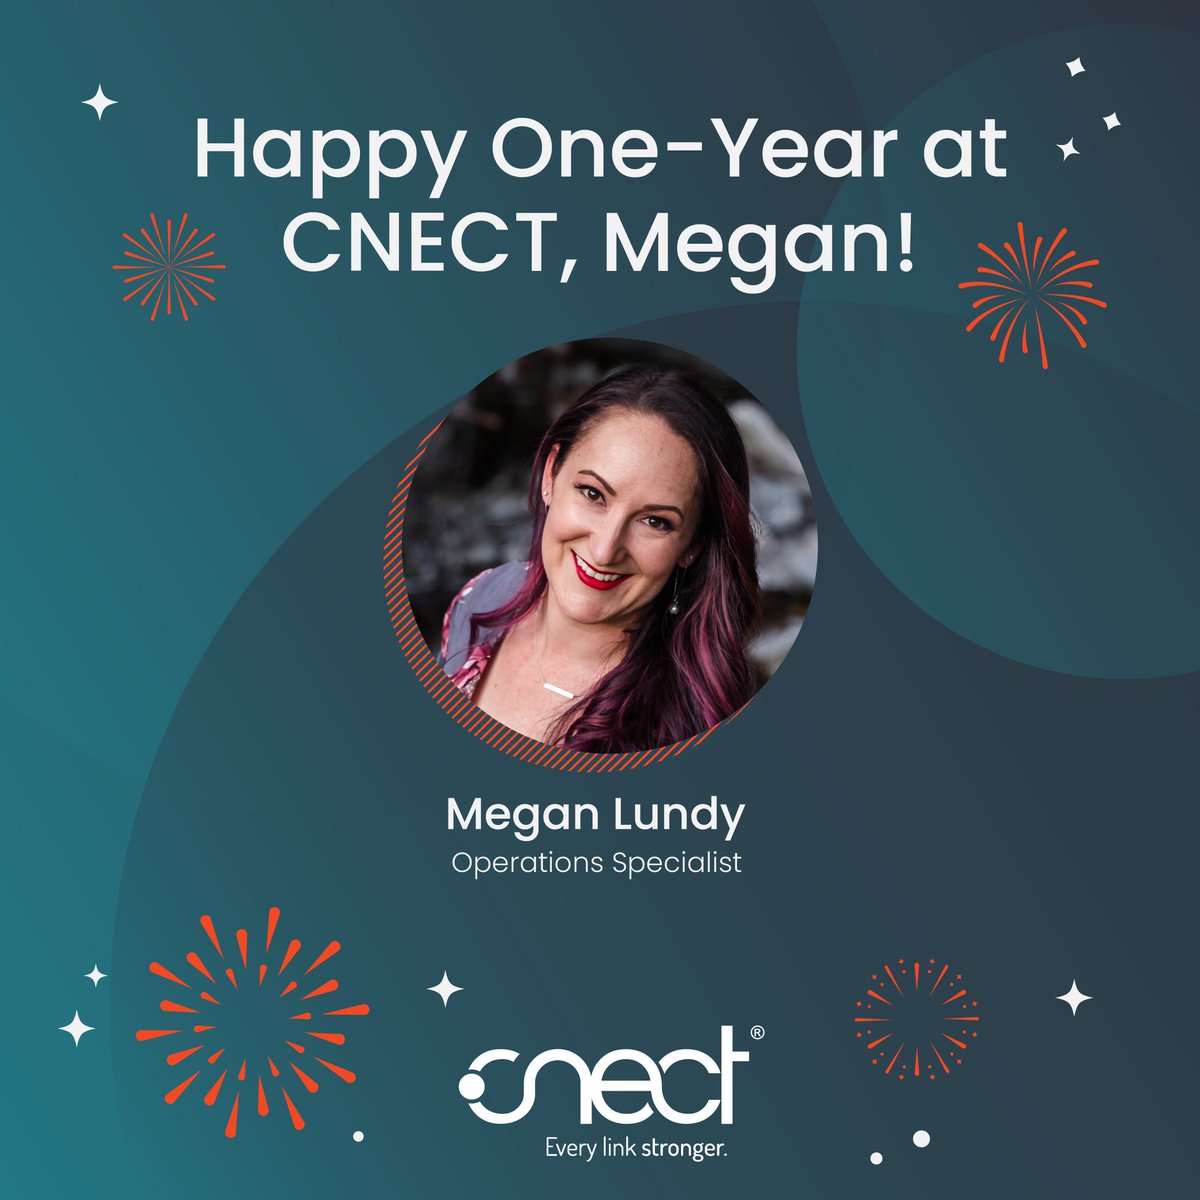 Congratulations to Megan Lundy on her one-year anniversary with CNECT! Megan is an Operations Specialist, and she began her journey with us in March 2023. Her work plays a pivotal role in our ability to provide the best service and bring the most value to our members.